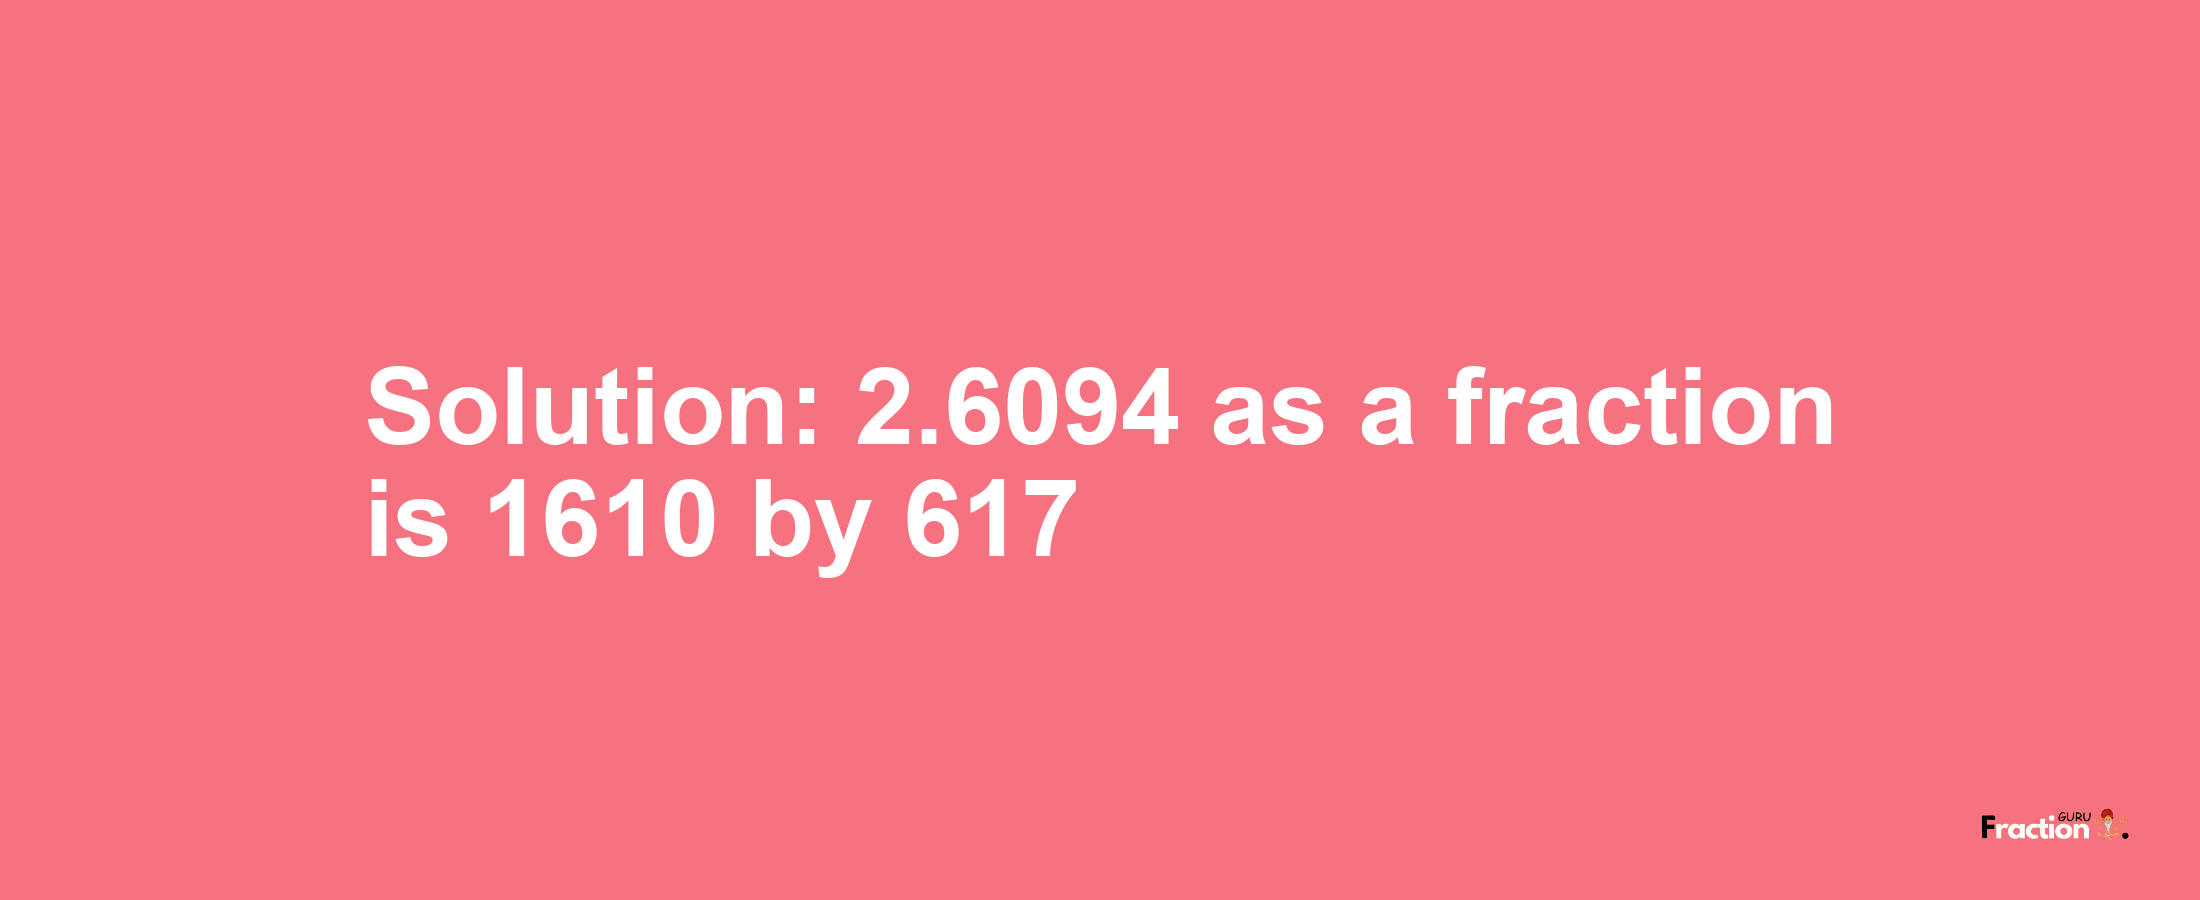 Solution:2.6094 as a fraction is 1610/617